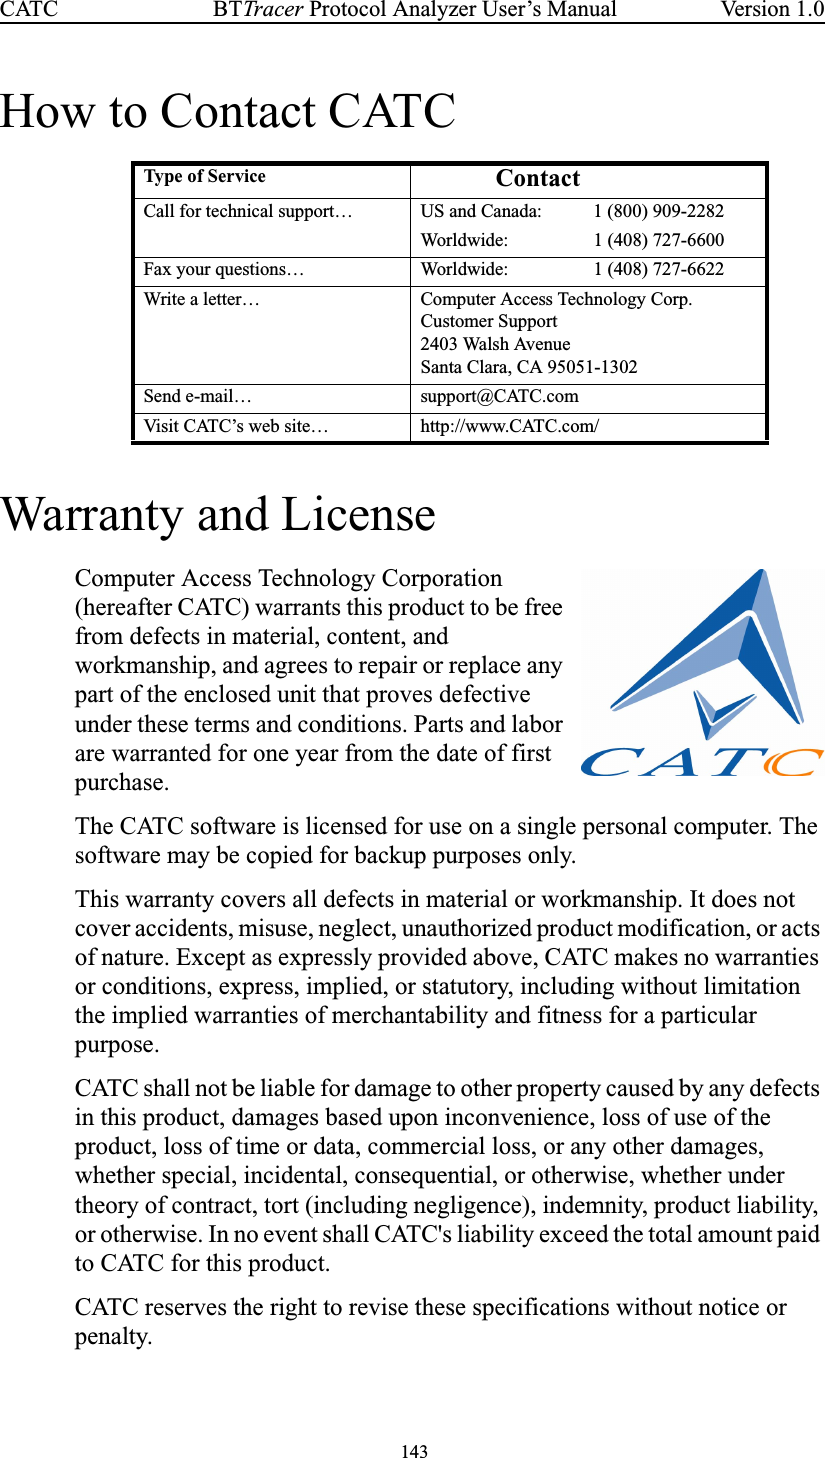 143BTTracer Protocol Analyzer User’s ManualCATC Version 1.0How to Contact CATCWarranty and LicenseComputer Access Technology Corporation(hereafter CATC) warrants this product to be freefrom defects in material, content, andworkmanship, and agrees to repair or replace anypart of the enclosed unit that proves defectiveunder these terms and conditions. Parts and laborare warranted for one year from the date of firstpurchase.The CATC software is licensed for use on a single personal computer. Thesoftware may be copied for backup purposes only.This warranty covers all defects in material or workmanship. It does notcover accidents, misuse, neglect, unauthorized product modification, or actsof nature. Except as expressly provided above, CATC makes no warrantiesor conditions, express, implied, or statutory, including without limitationthe implied warranties of merchantability and fitness for a particularpurpose.CATC shall not be liable for damage to other property caused by any defectsin this product, damages based upon inconvenience, loss of use of theproduct, loss of time or data, commercial loss, or any other damages,whether special, incidental, consequential, or otherwise, whether undertheory of contract, tort (including negligence), indemnity, product liability,or otherwise. In no event shall CATC&apos;s liability exceed the total amount paidto CATC for this product.CATC reserves the right to revise these specifications without notice orpenalty.Type o f Service ContactCall for technical support… US and Canada: 1 (800) 909-2282Worldwide: 1 (408) 727-6600Fax your questions… Worldwide: 1 (408) 727-6622Write a letter… Computer Access Technology Corp.Customer Support2403 Walsh AvenueSanta Clara, CA 95051-1302Send e-mail… support@CATC.comVisit CATC’s web site… http://www.CATC.com/